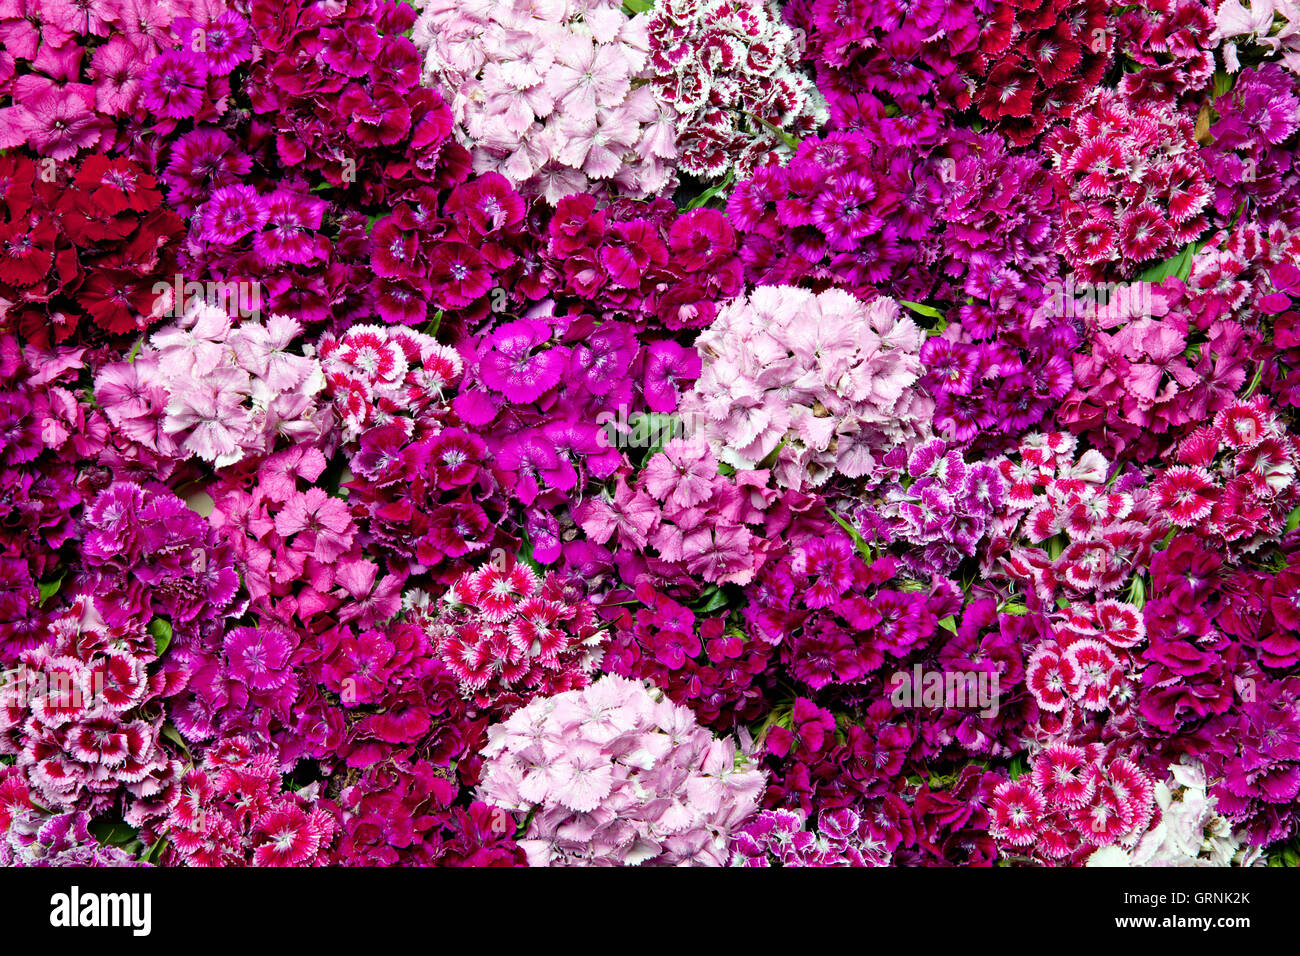 Dianthus flower as pink background. Stock Photo